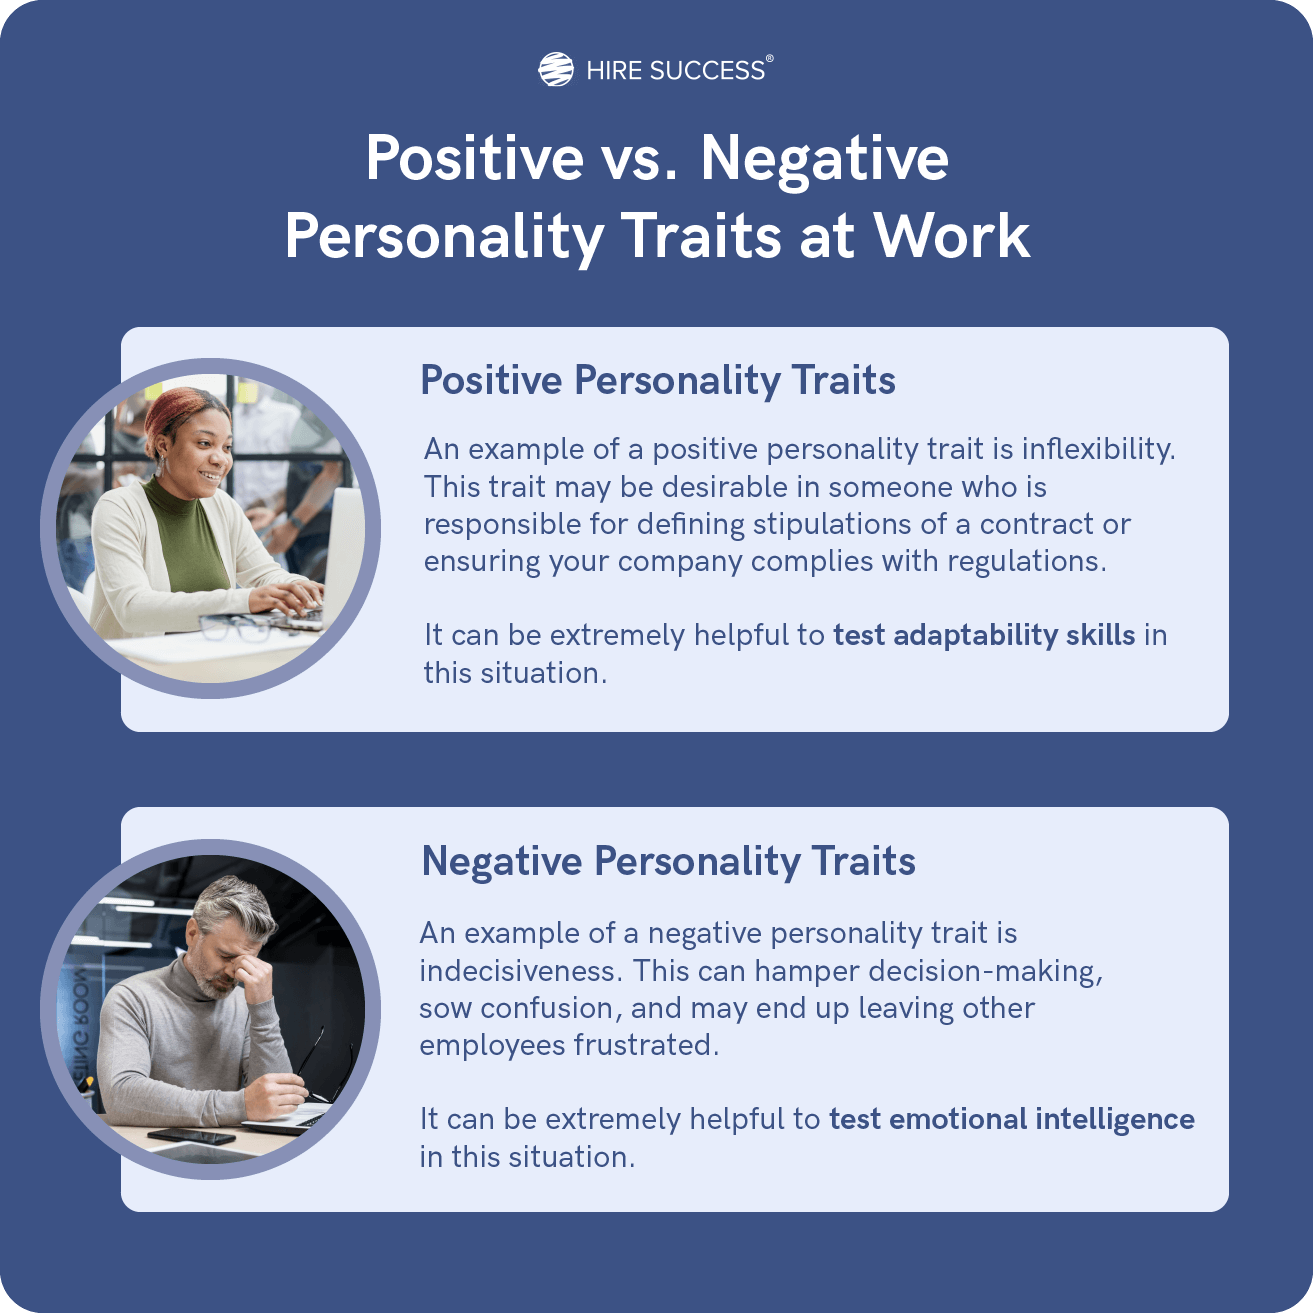 Positive vs negative personality traits at work.